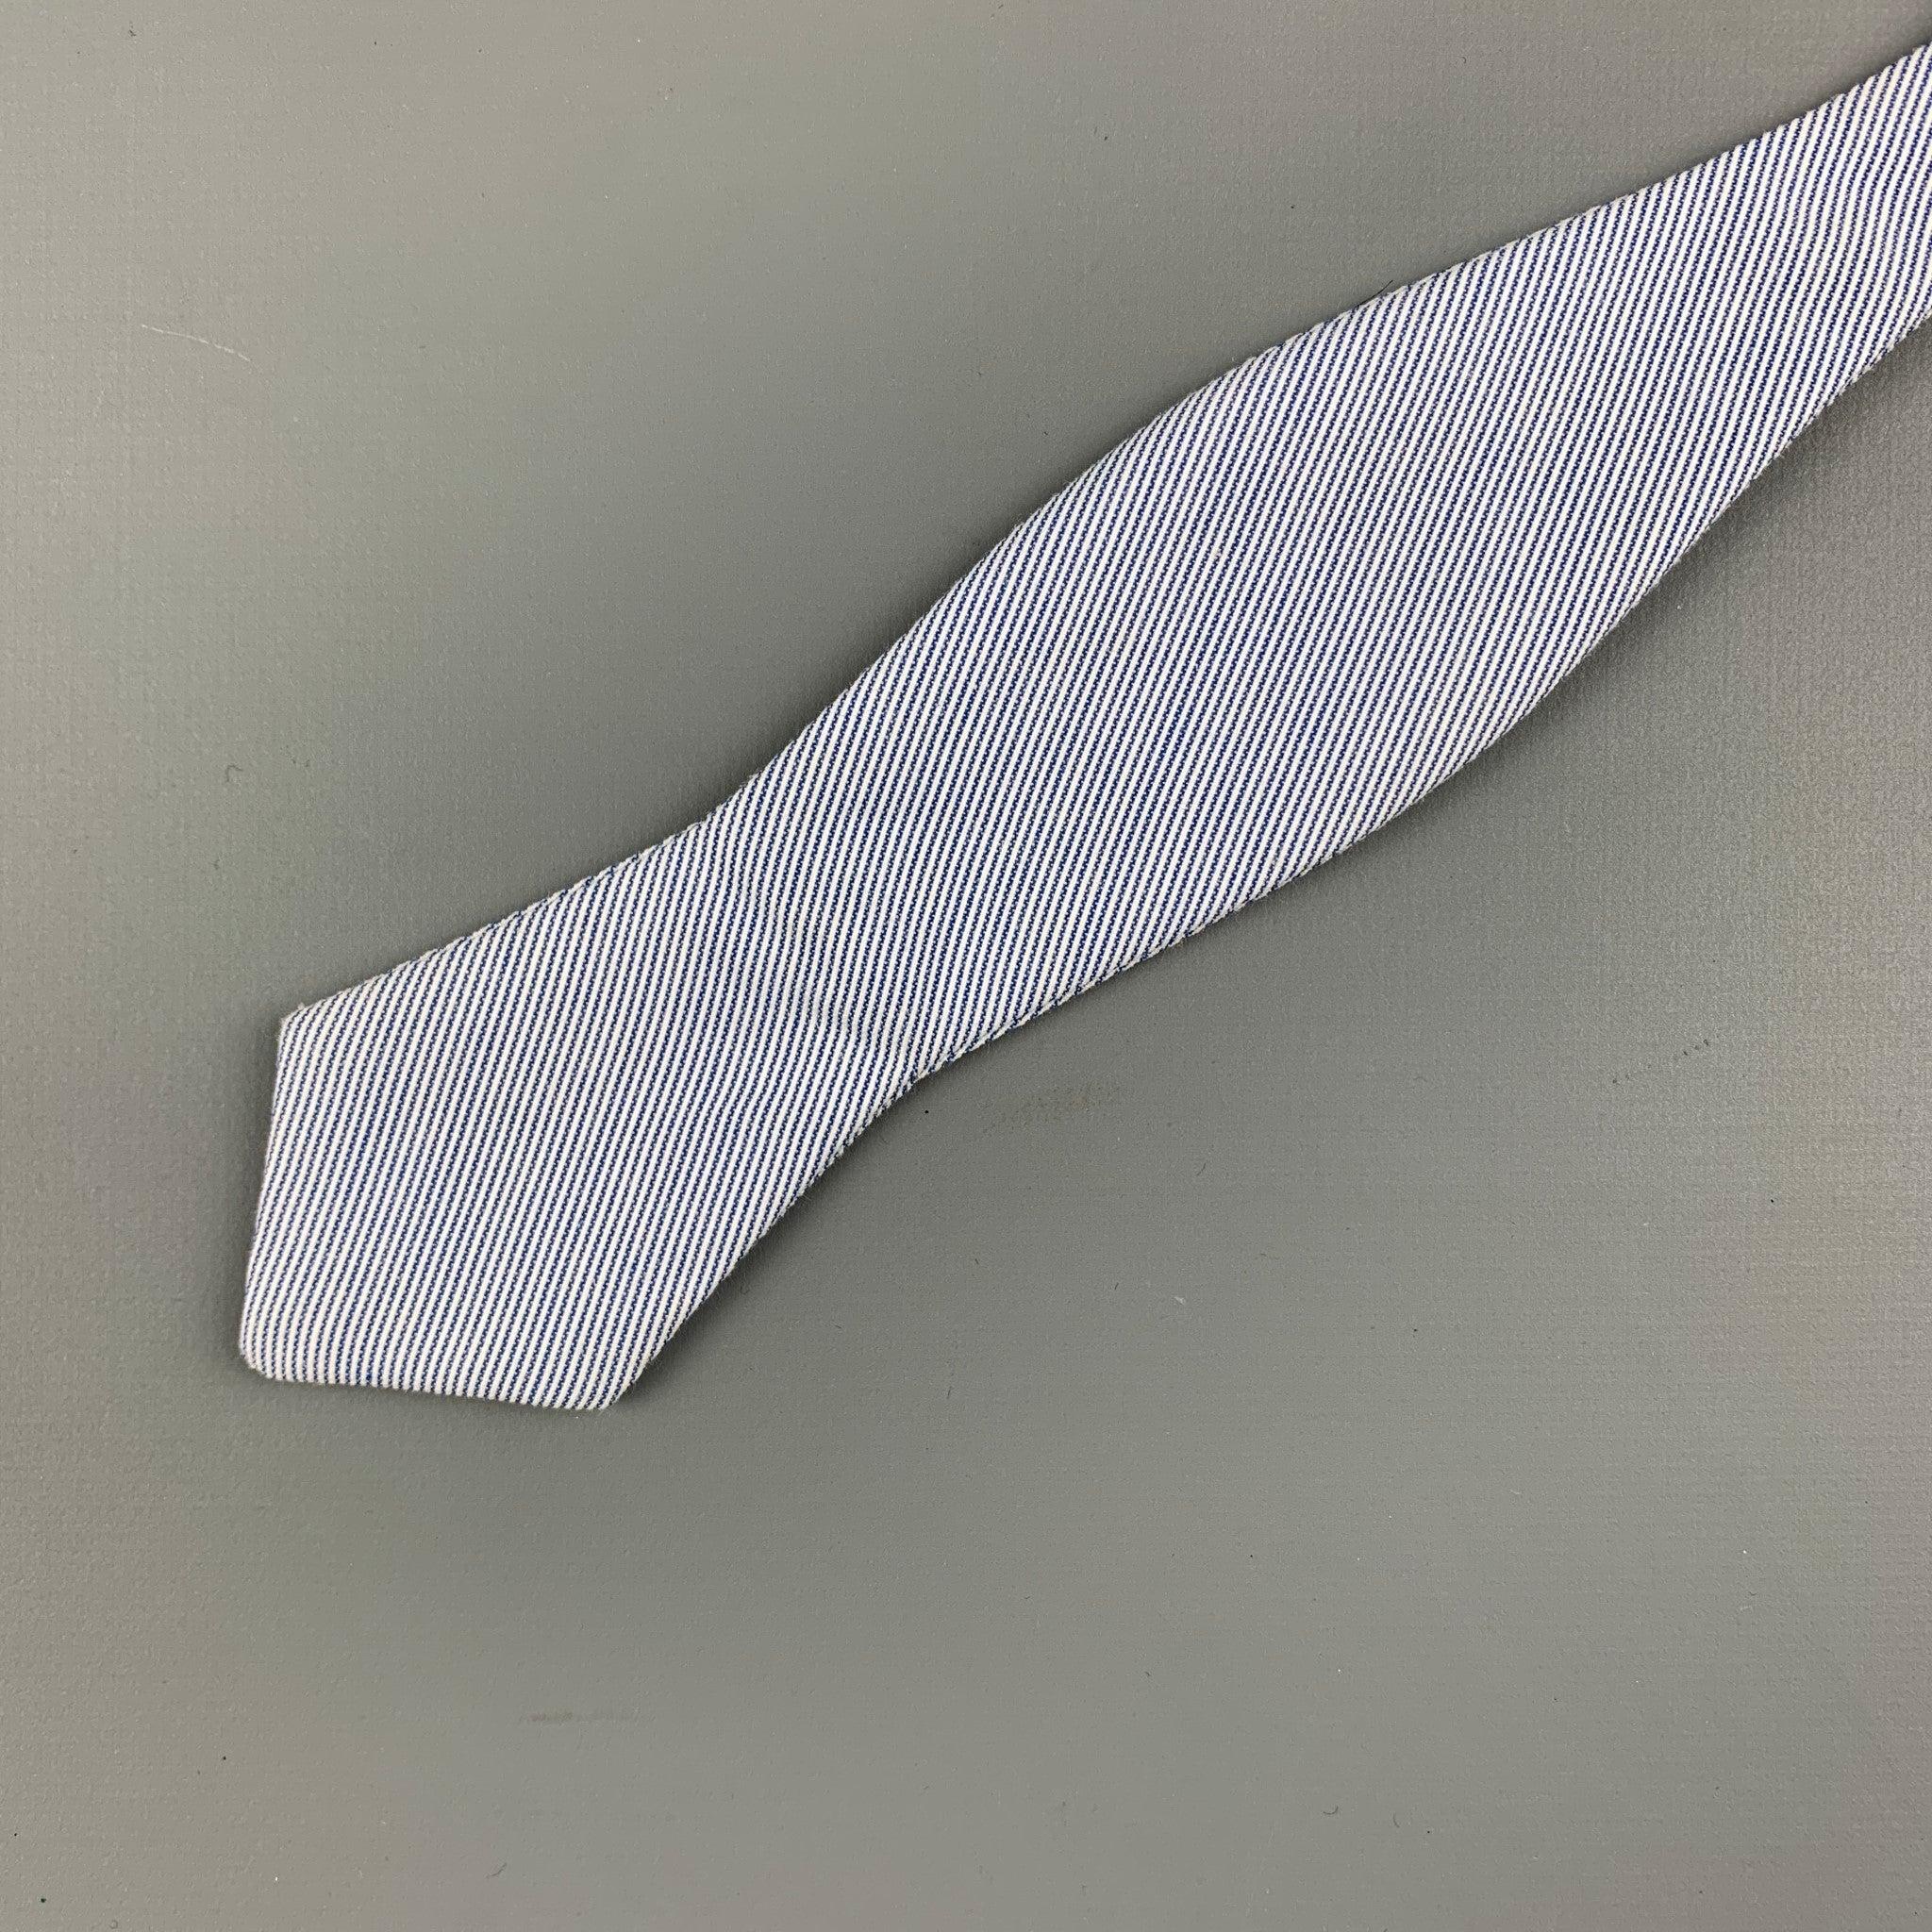 ALEXANDER OLCH bow tie comes in a blue and white striped cotton fiber fabric featuring an adjustable fit. Made in USA.Excellent Pre-Owned Condition.Width: 1 3/4 inches  
 

 

  
  
  
 Sui Generis Reference: 99599
 Category: Bow Tie
 More Details
 